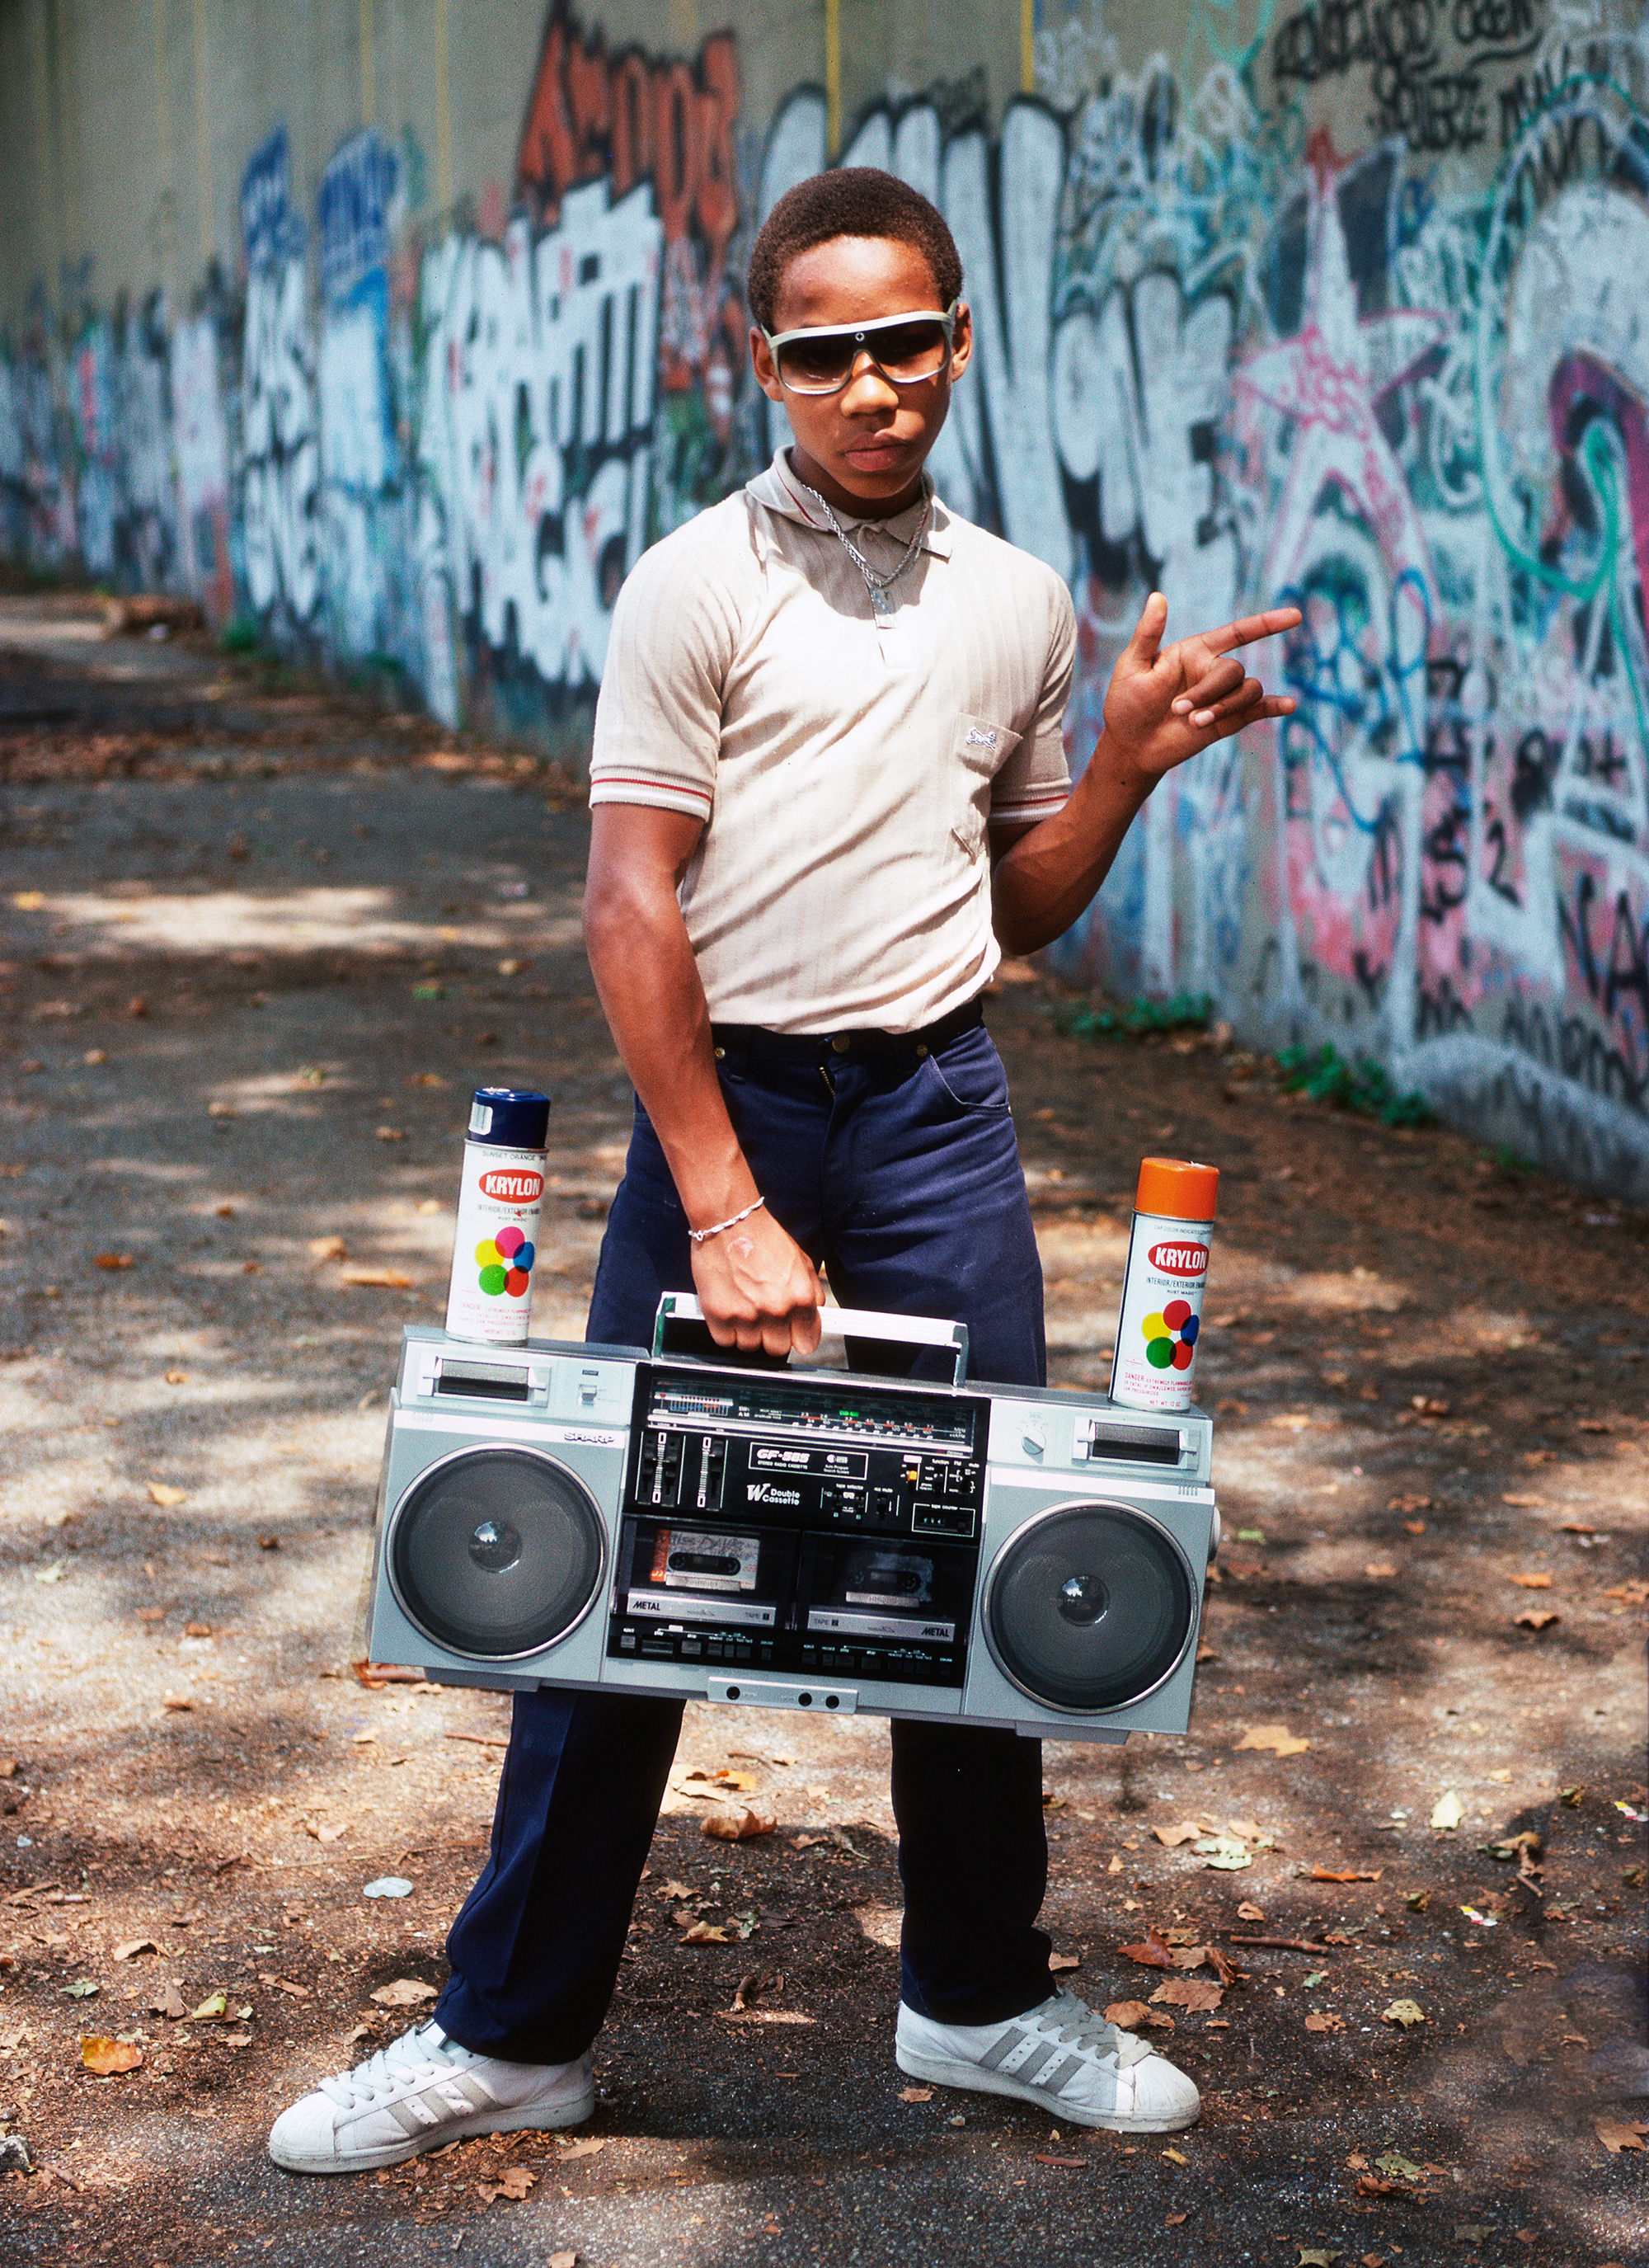 Little Crazy Legs During Shoot for Wild Style, Riverside Park, NY, 1983